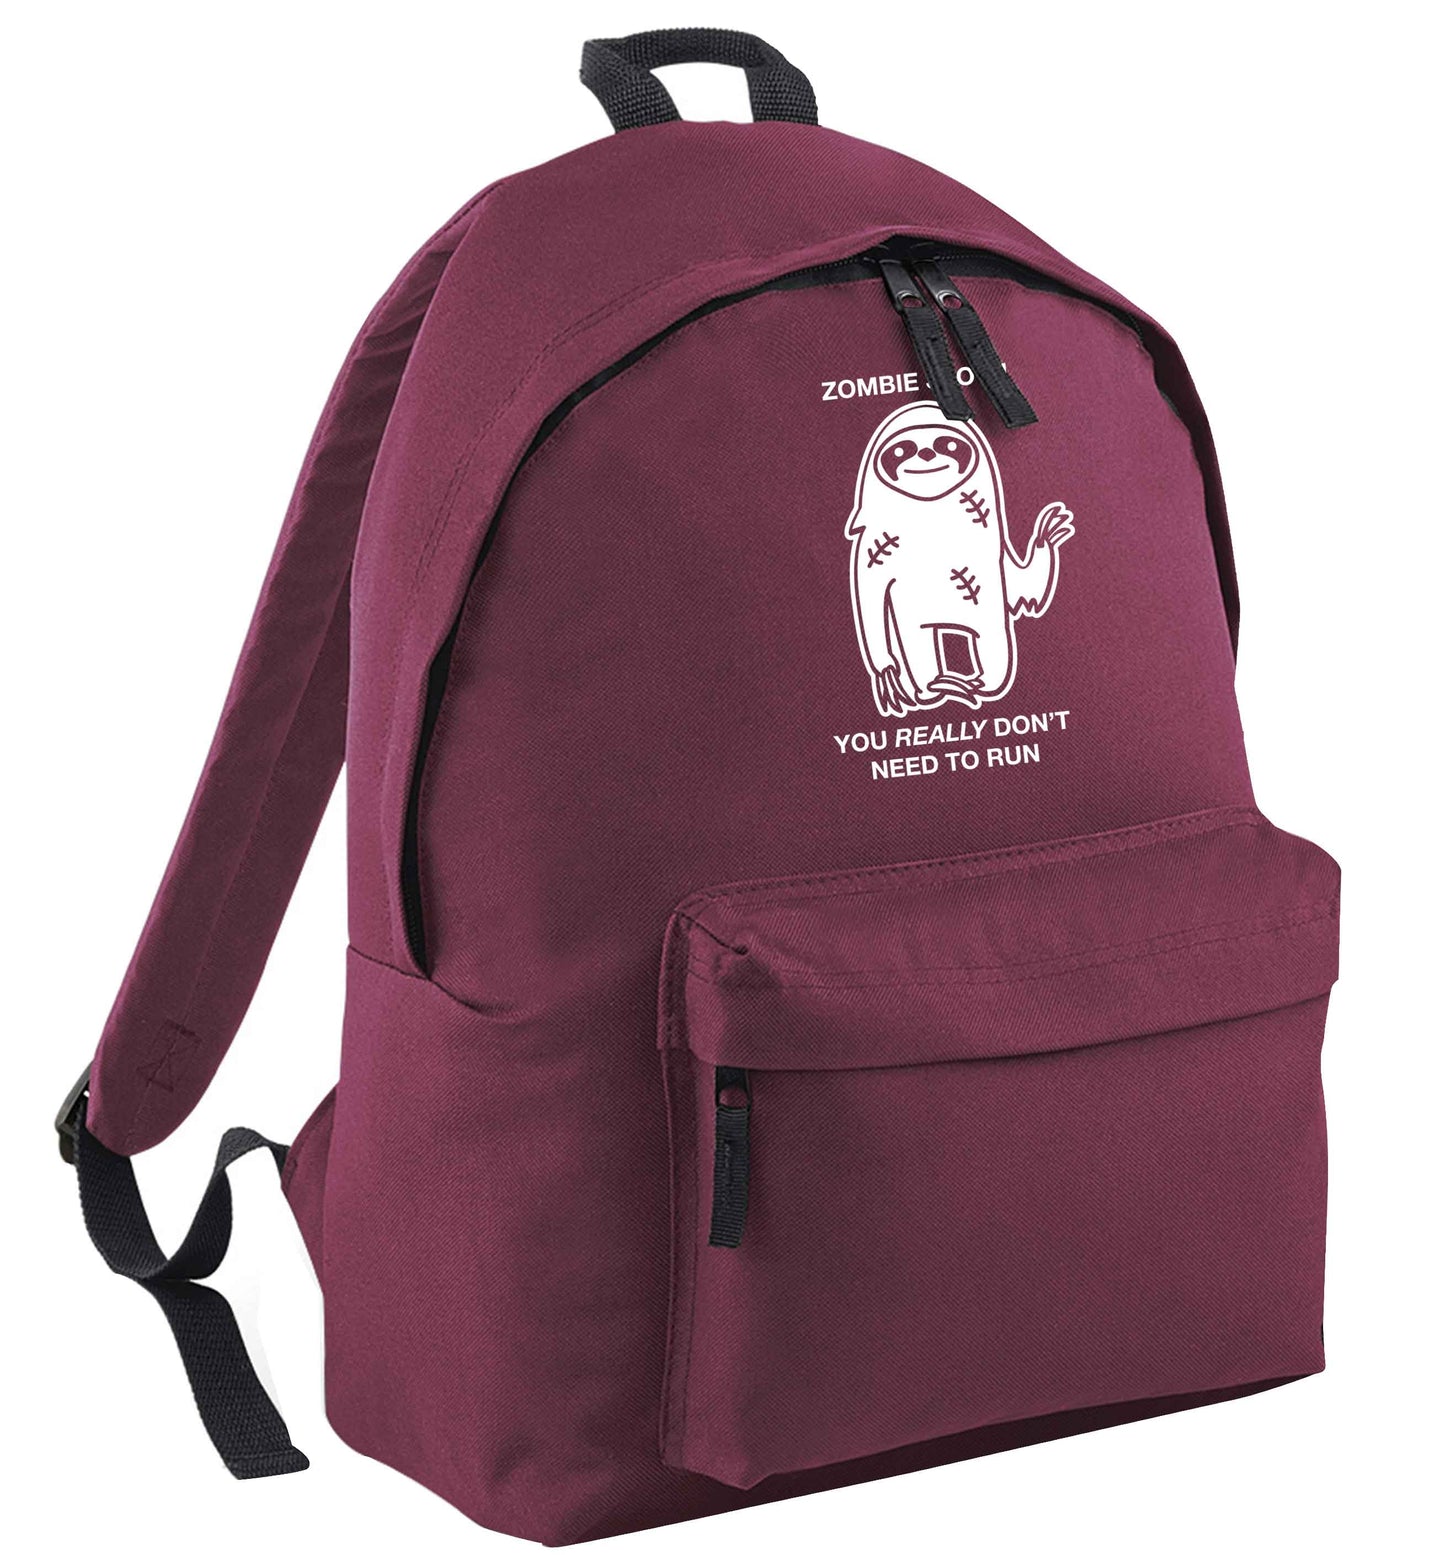 Zombie sloth you really don't need to run maroon adults backpack